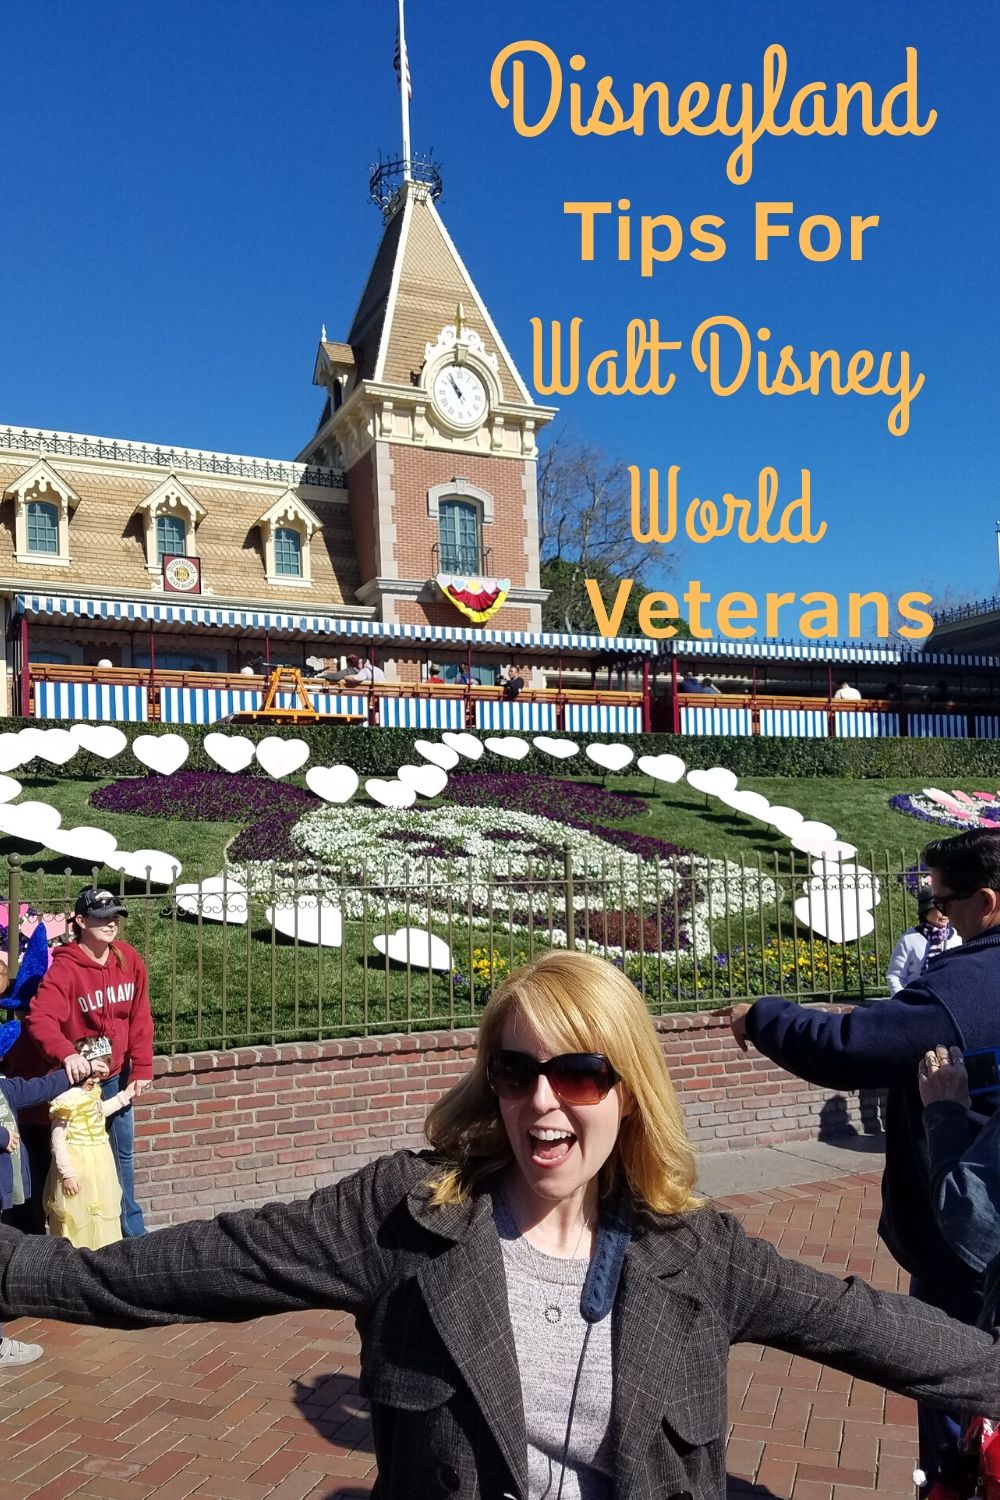 Visiting Disneyland for the first time? Check out our tips for Walt Disney World veteran visitors! #disneyland #dl #first visit